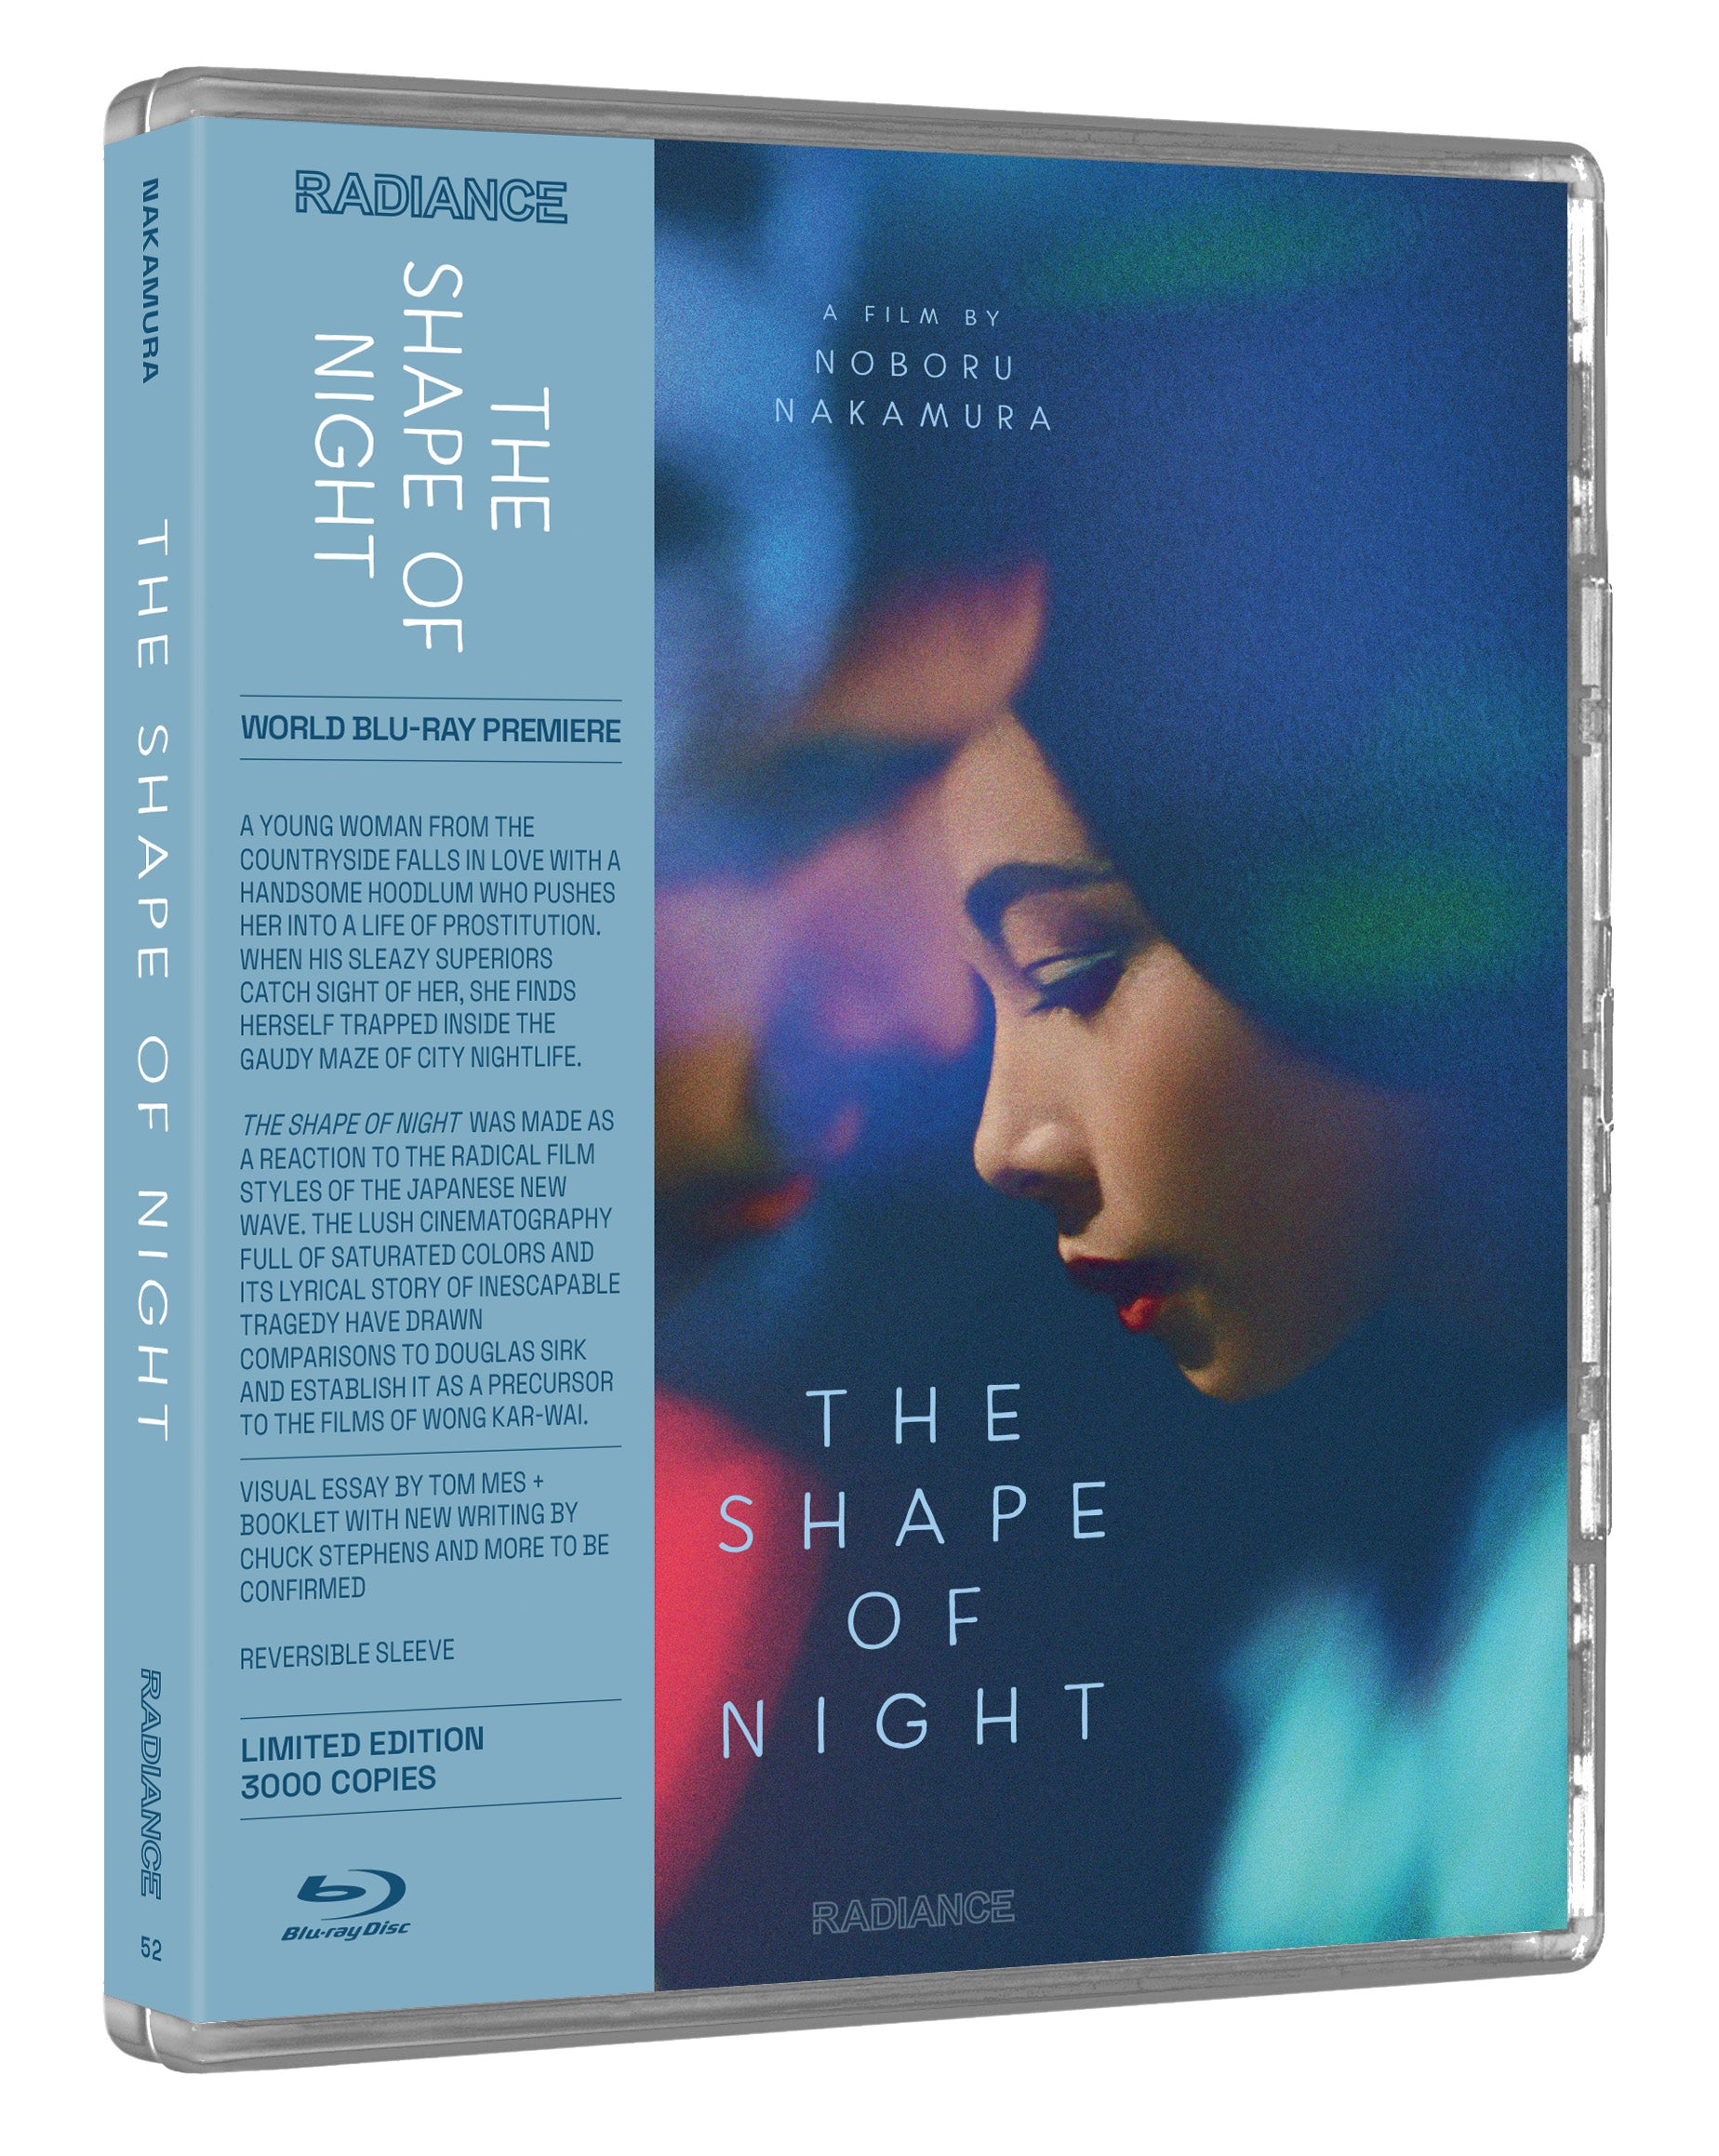 The Shape Of Night Blu-ray Limited Edition (Radiance U.S.) – The 